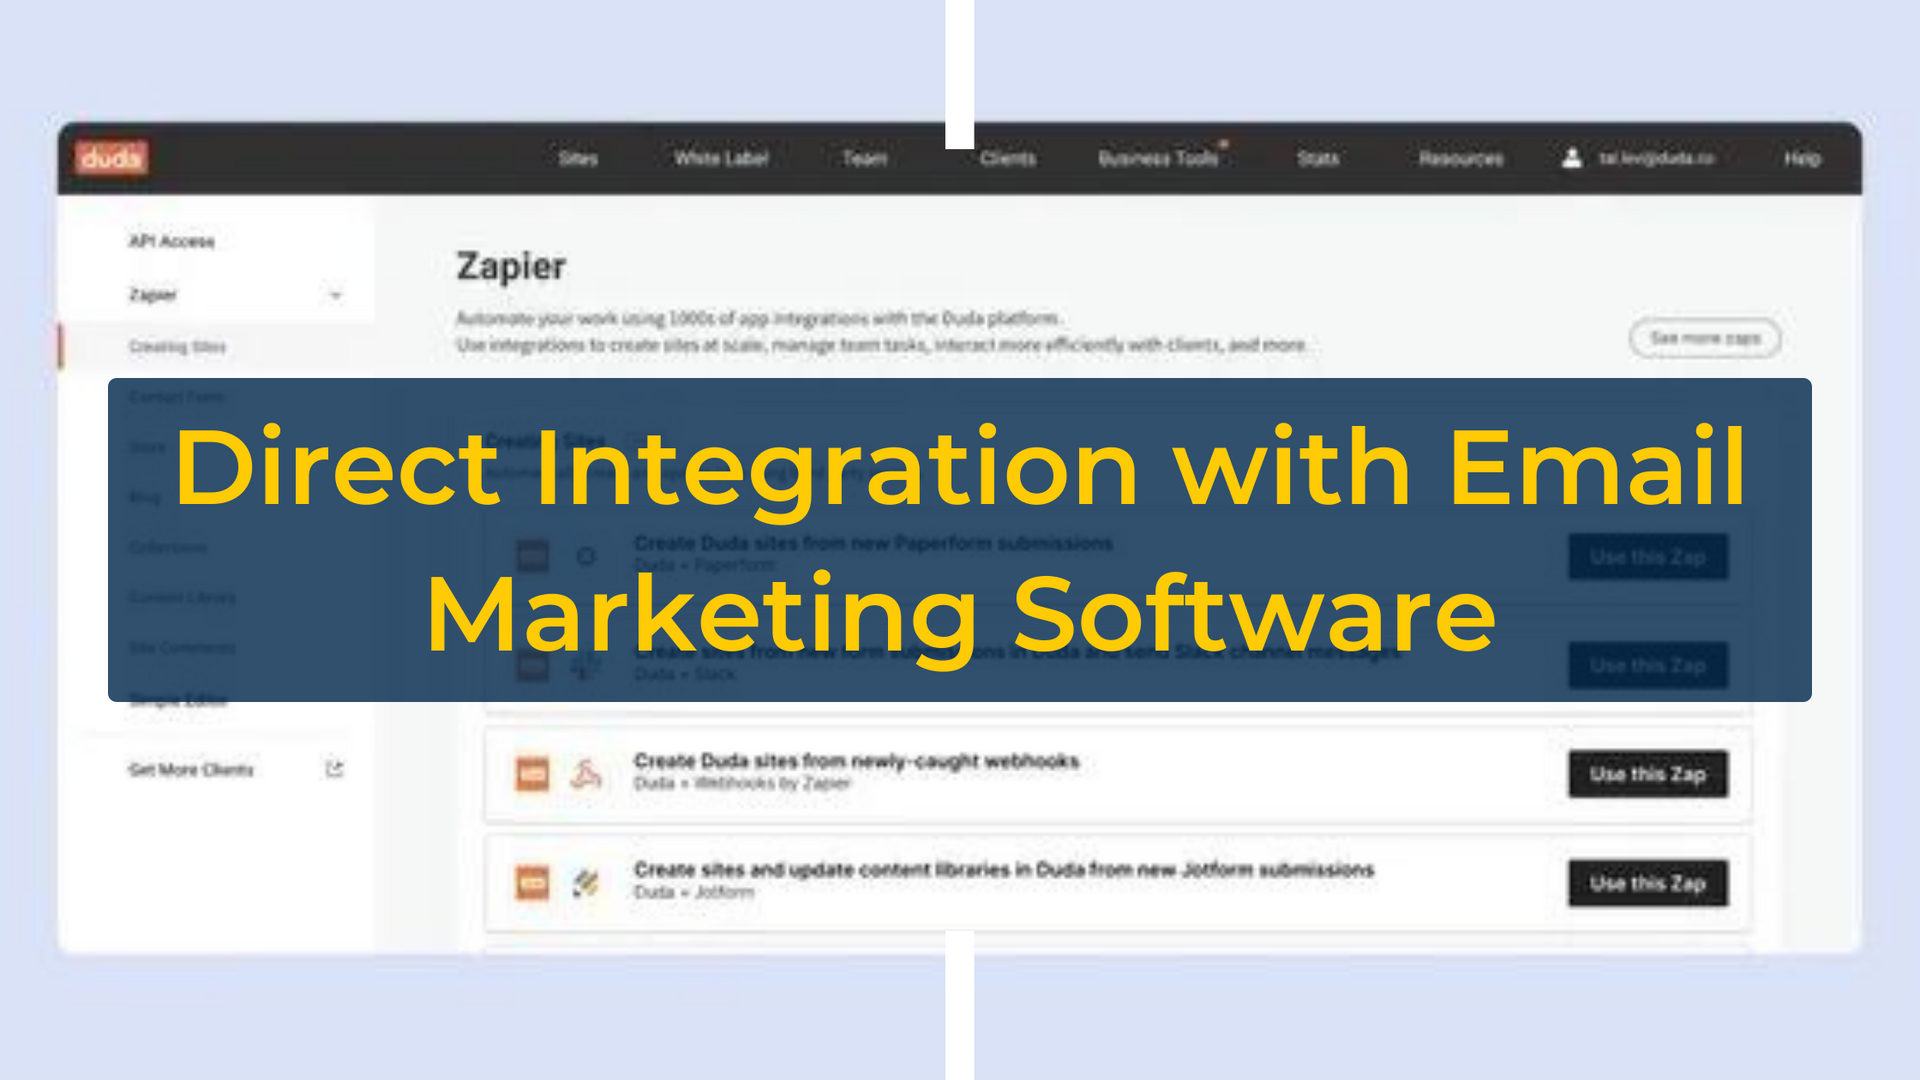 Direct Integration with Email Marketing Software